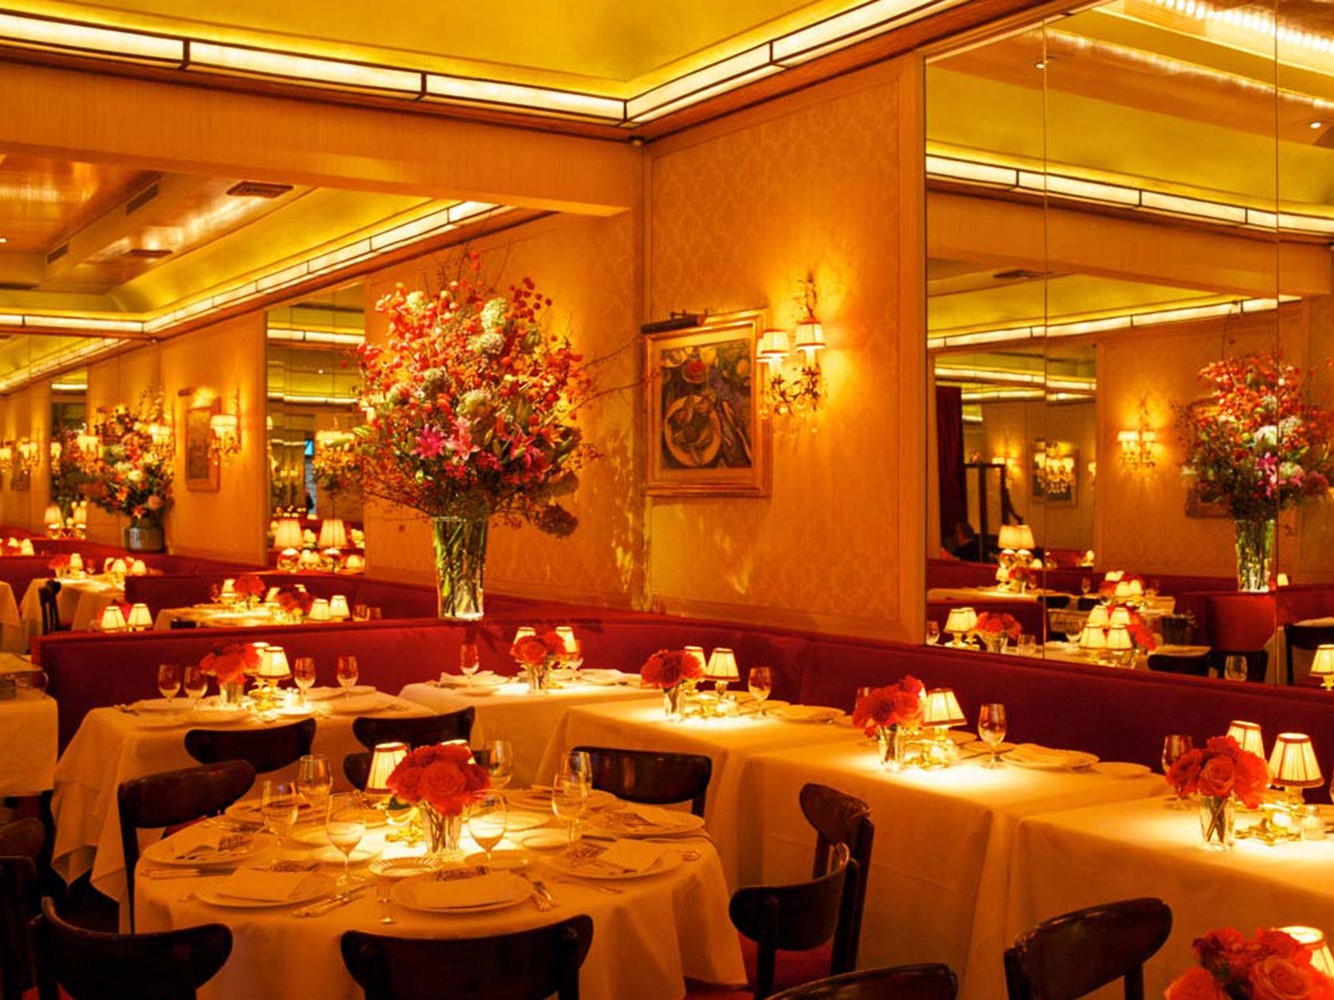 Longtime restaurant serving time-honored French delicacies in a flower-arrangement-filled space.